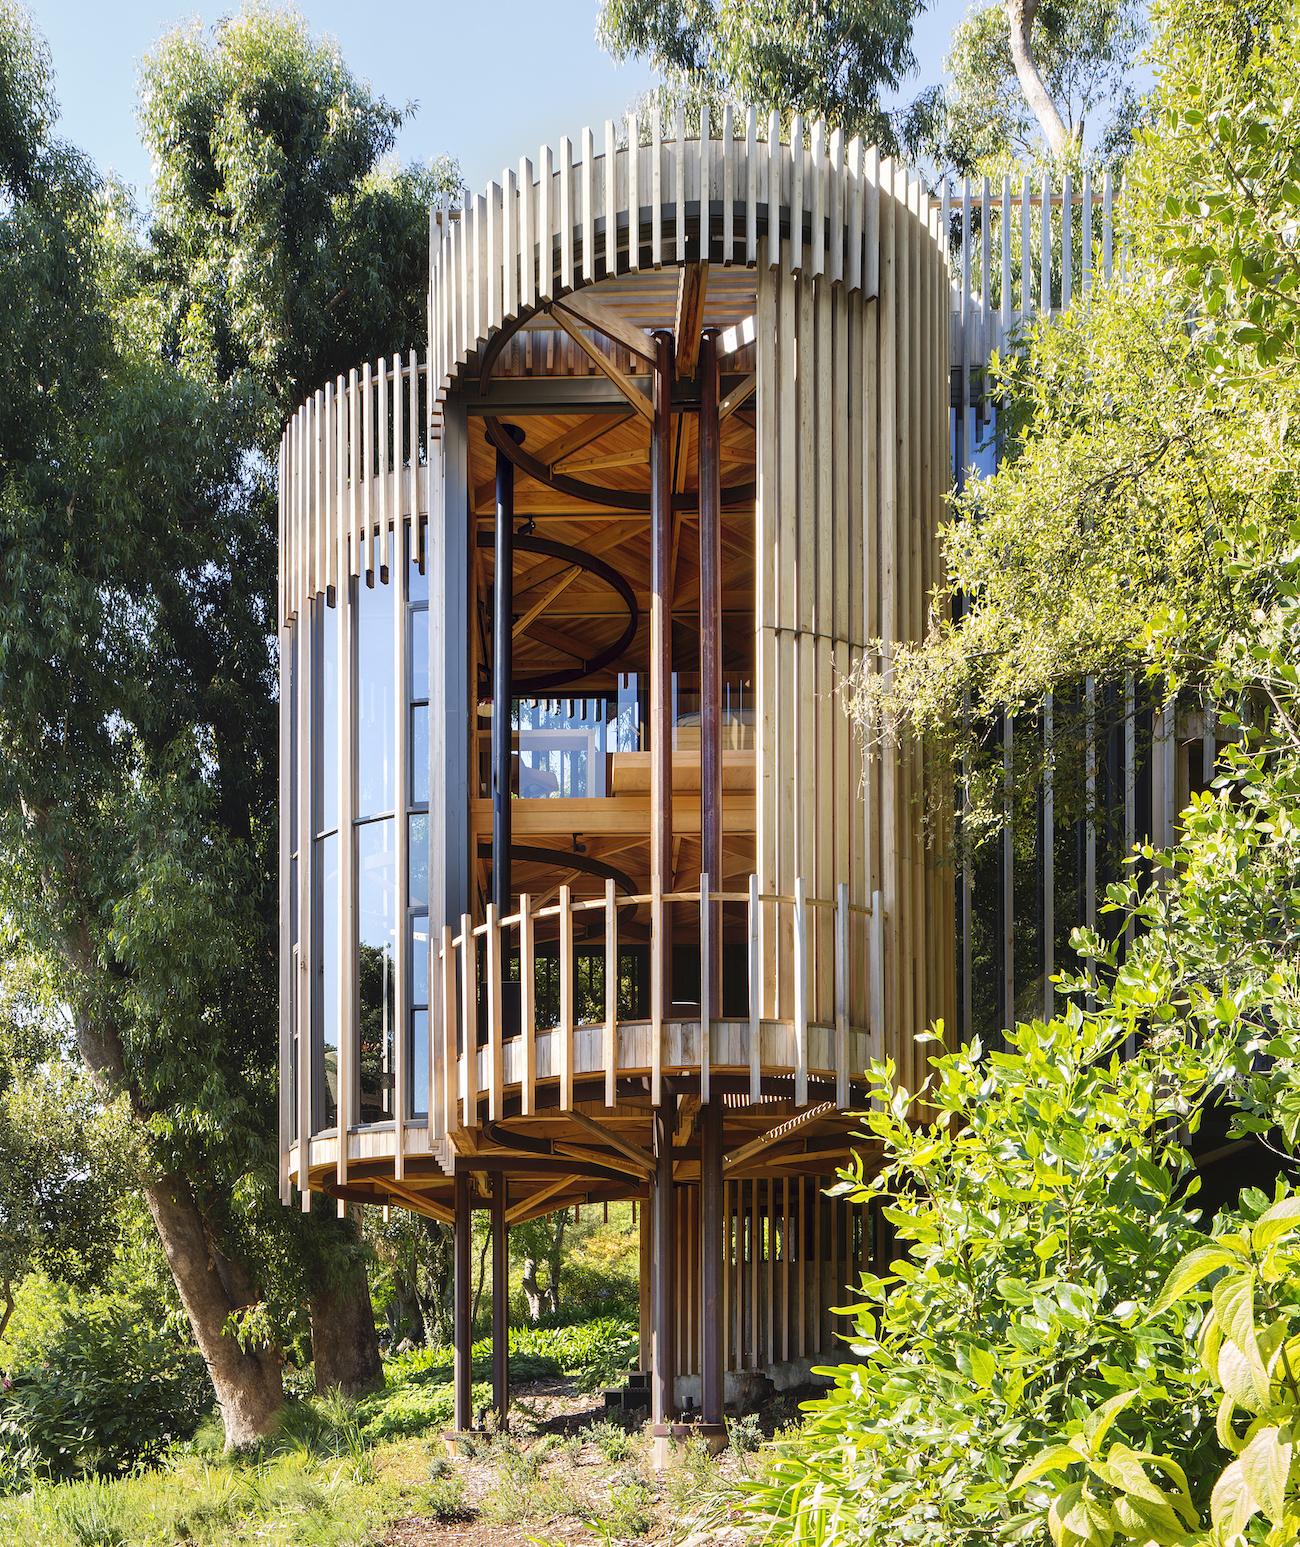 Tree House Constantia by Malan Vorster Architecture in Cape Town, South Africa